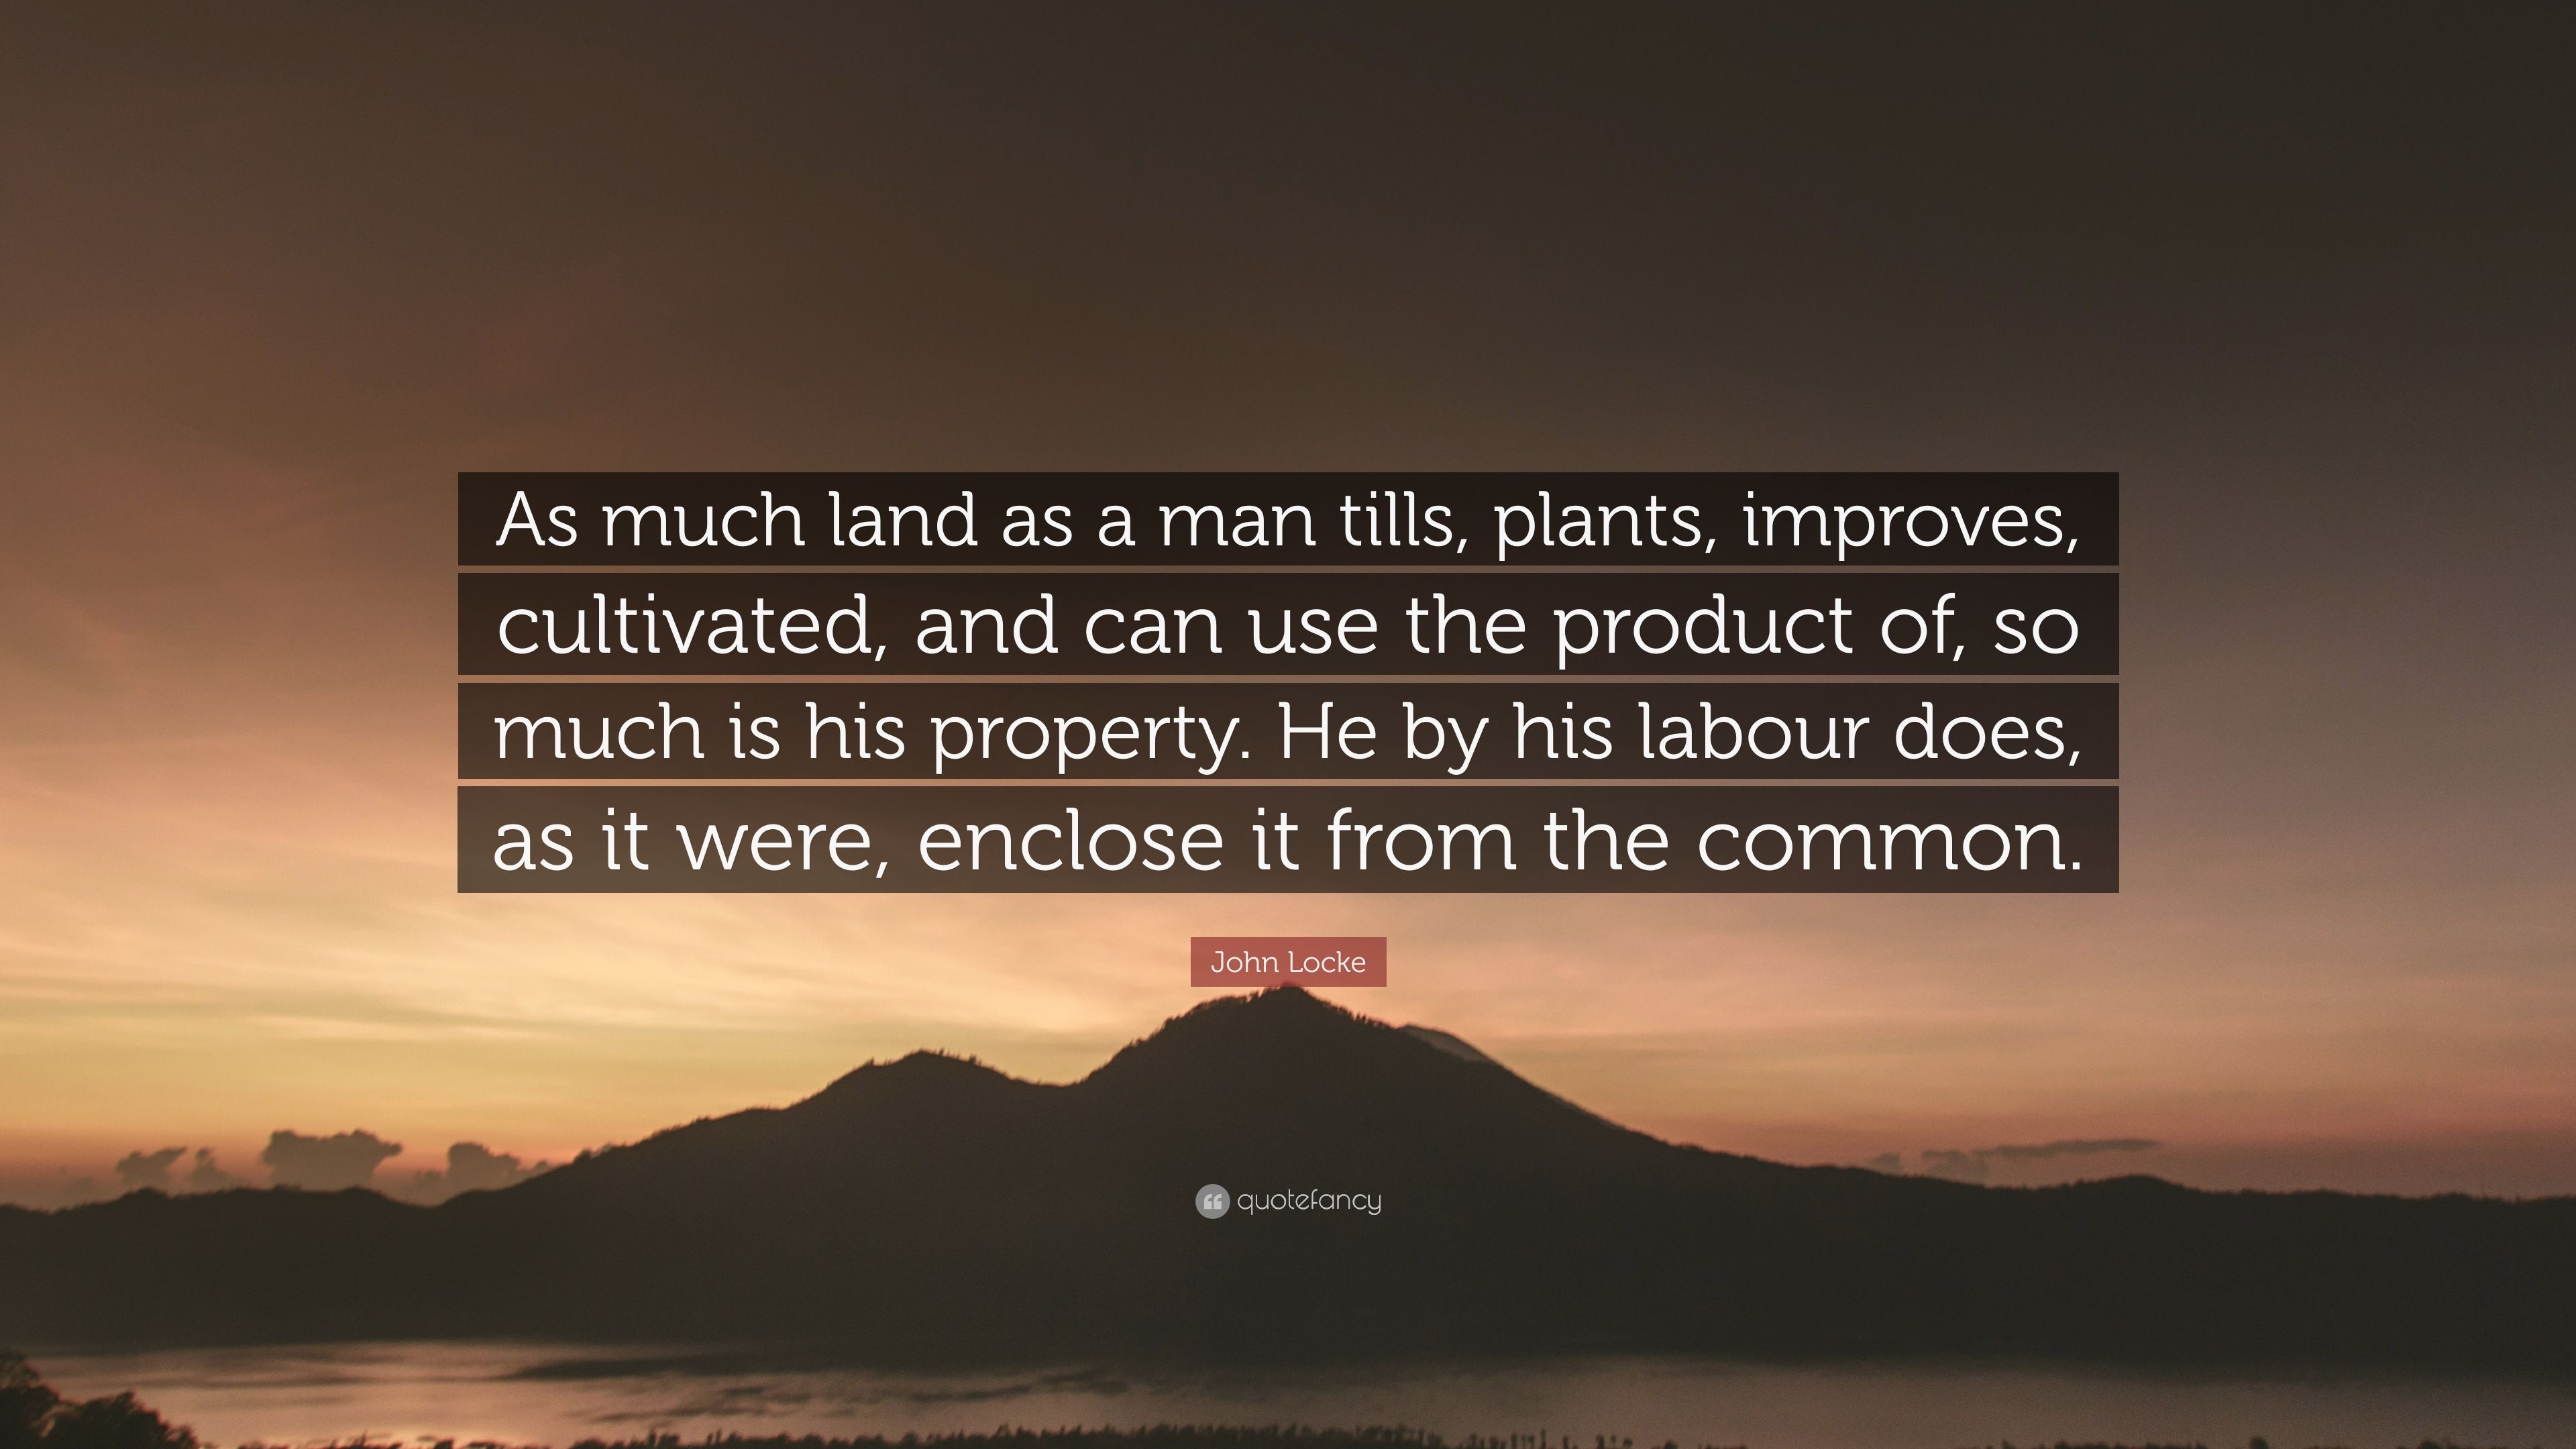 John Locke Quote: “As much land as a man tills, plants, improves, cultivated, and can use the product of, so much is his property. He by hi.” (12 wallpaper)